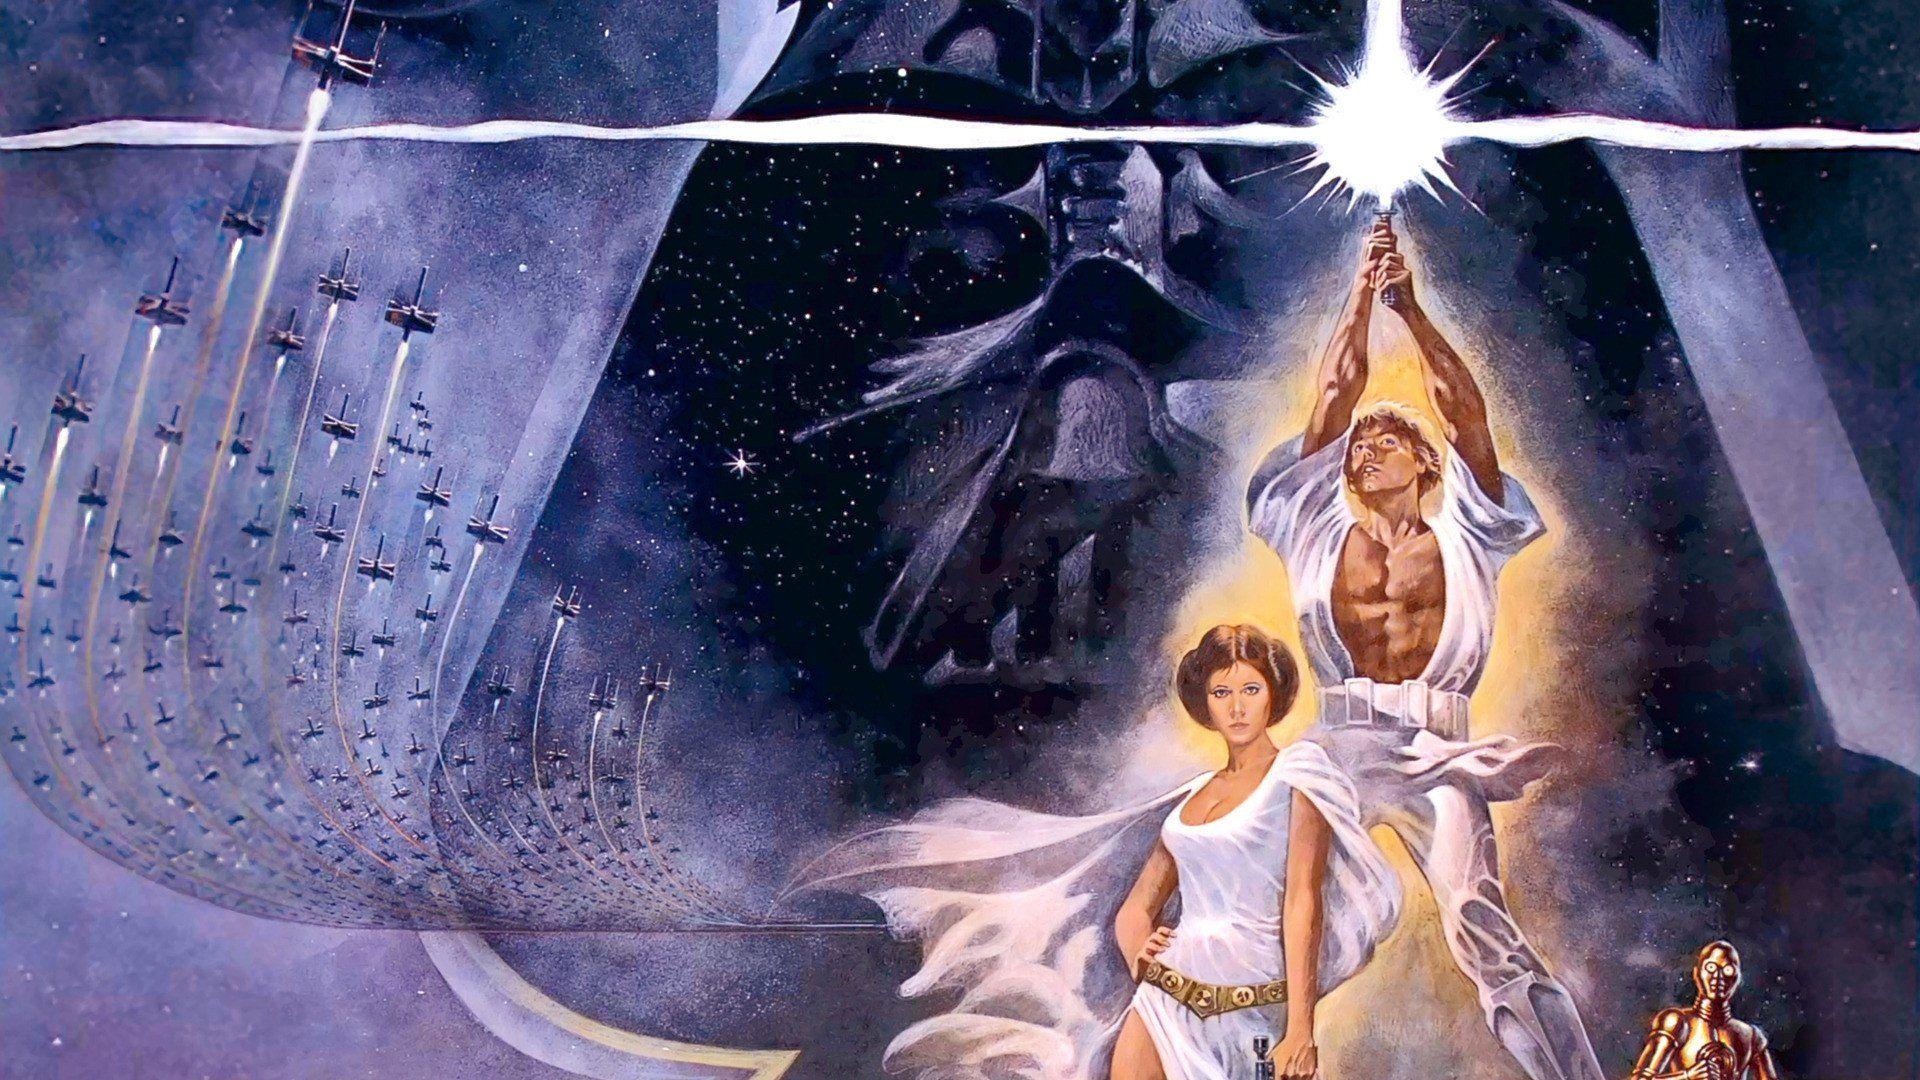 Star Wars Episode IV: A New Hope Full HD Wallpaper and Background